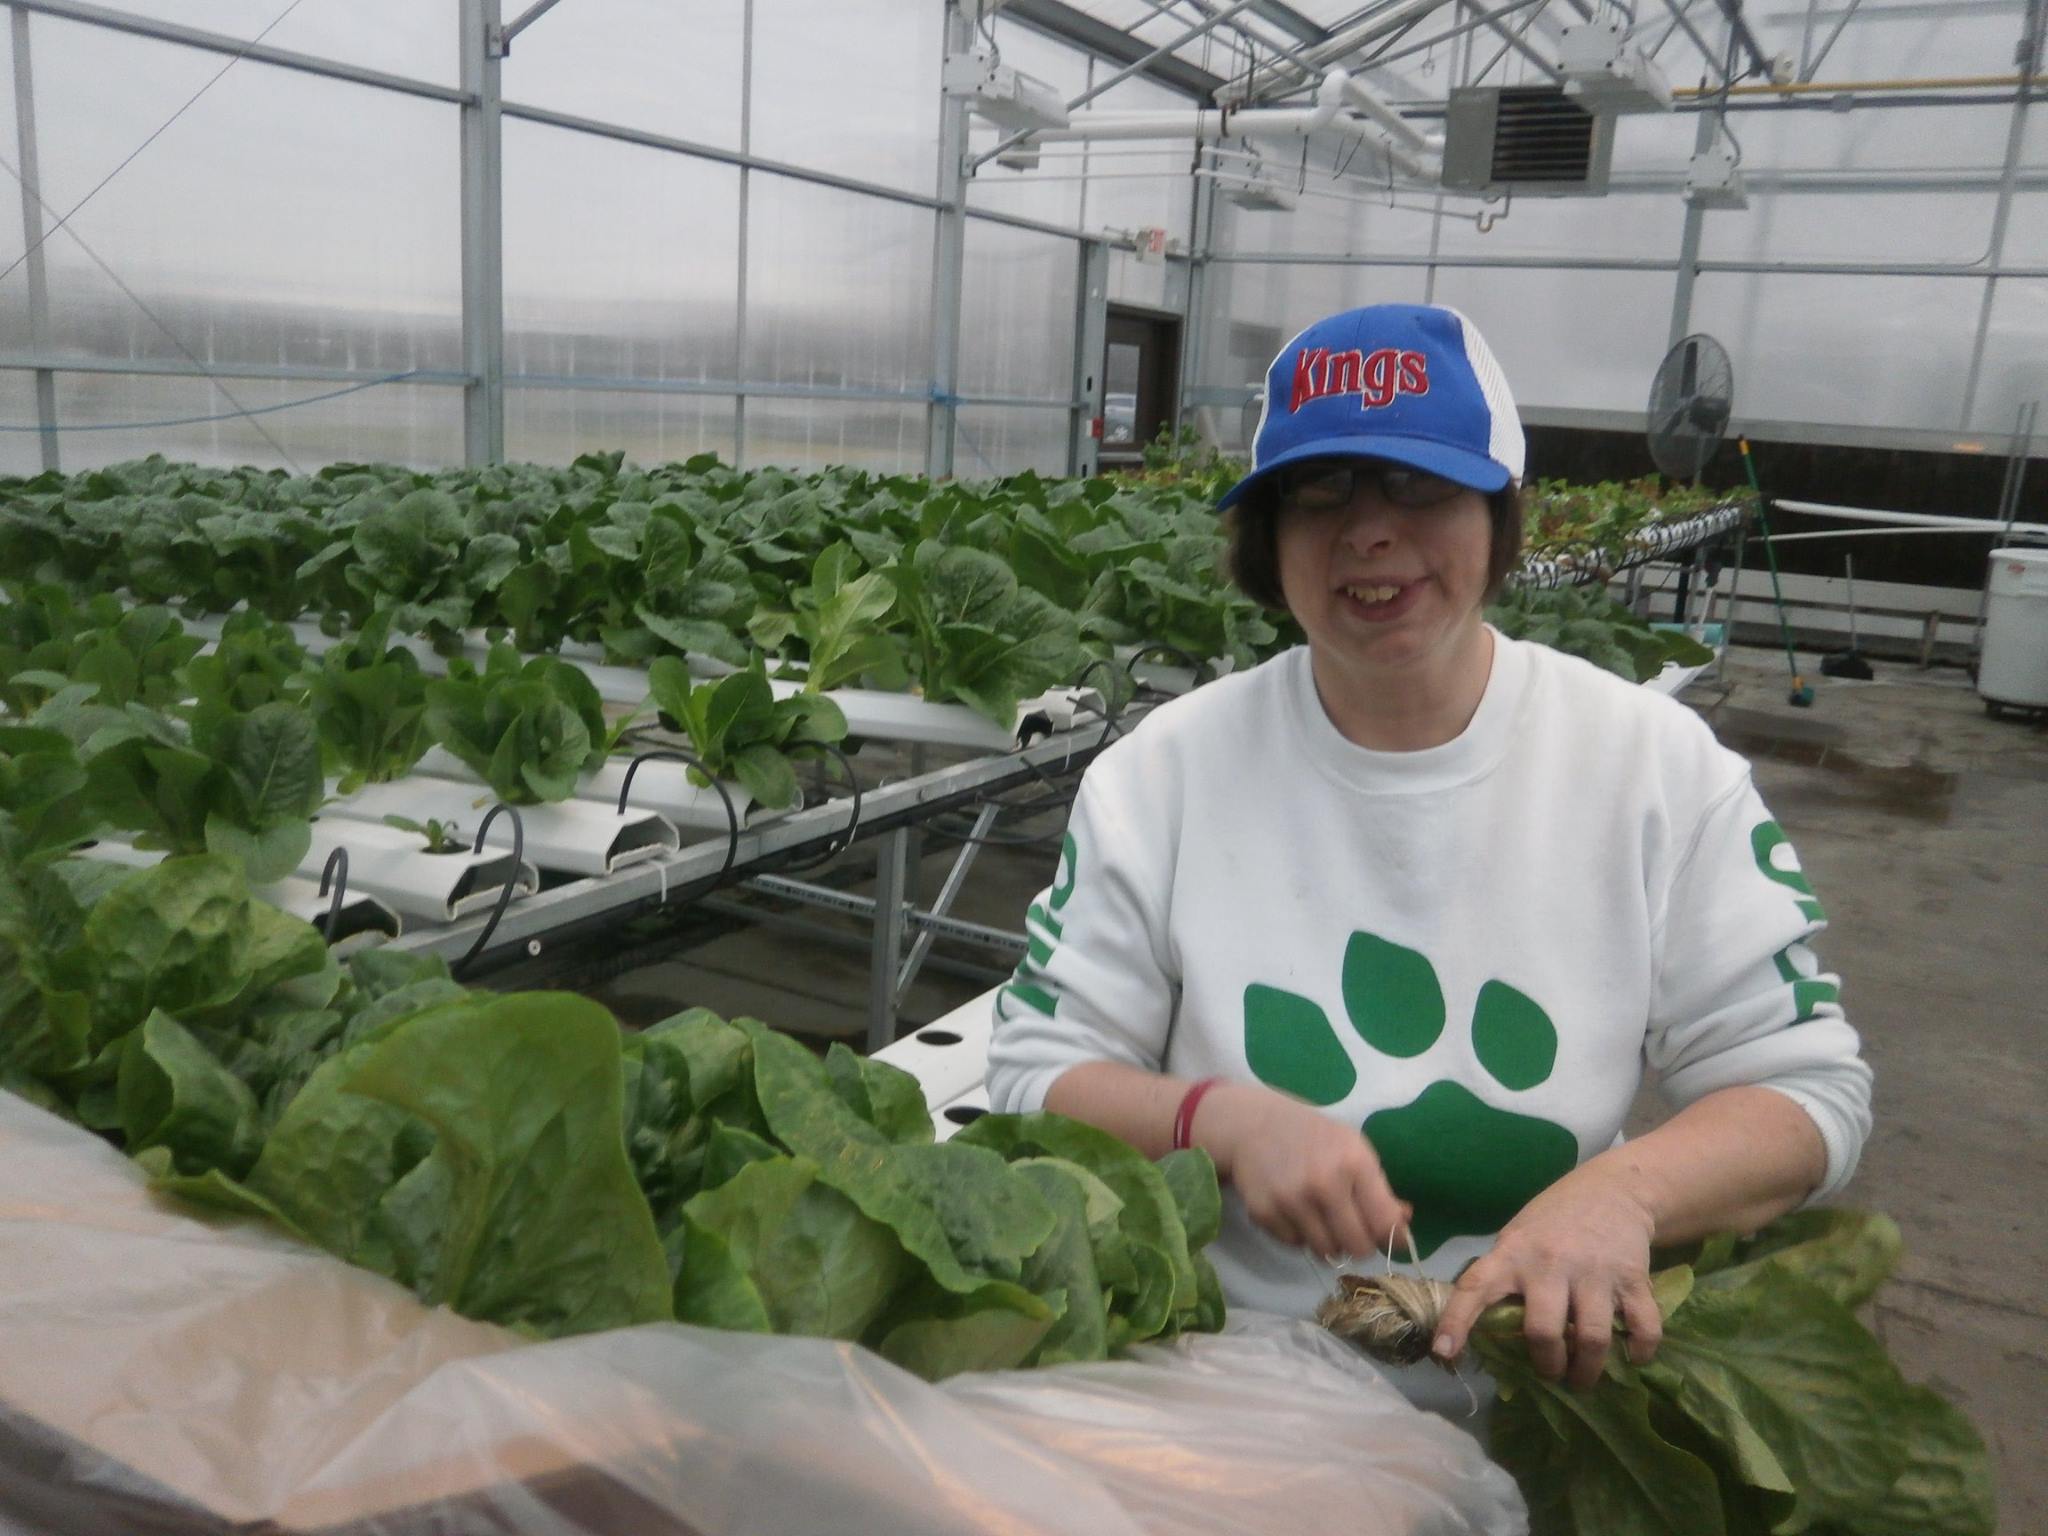 TAC Industries - Hydroponic Greenhouses Grow Voc Rehab Opportunities | Commercial Greerhouse Manufacturer